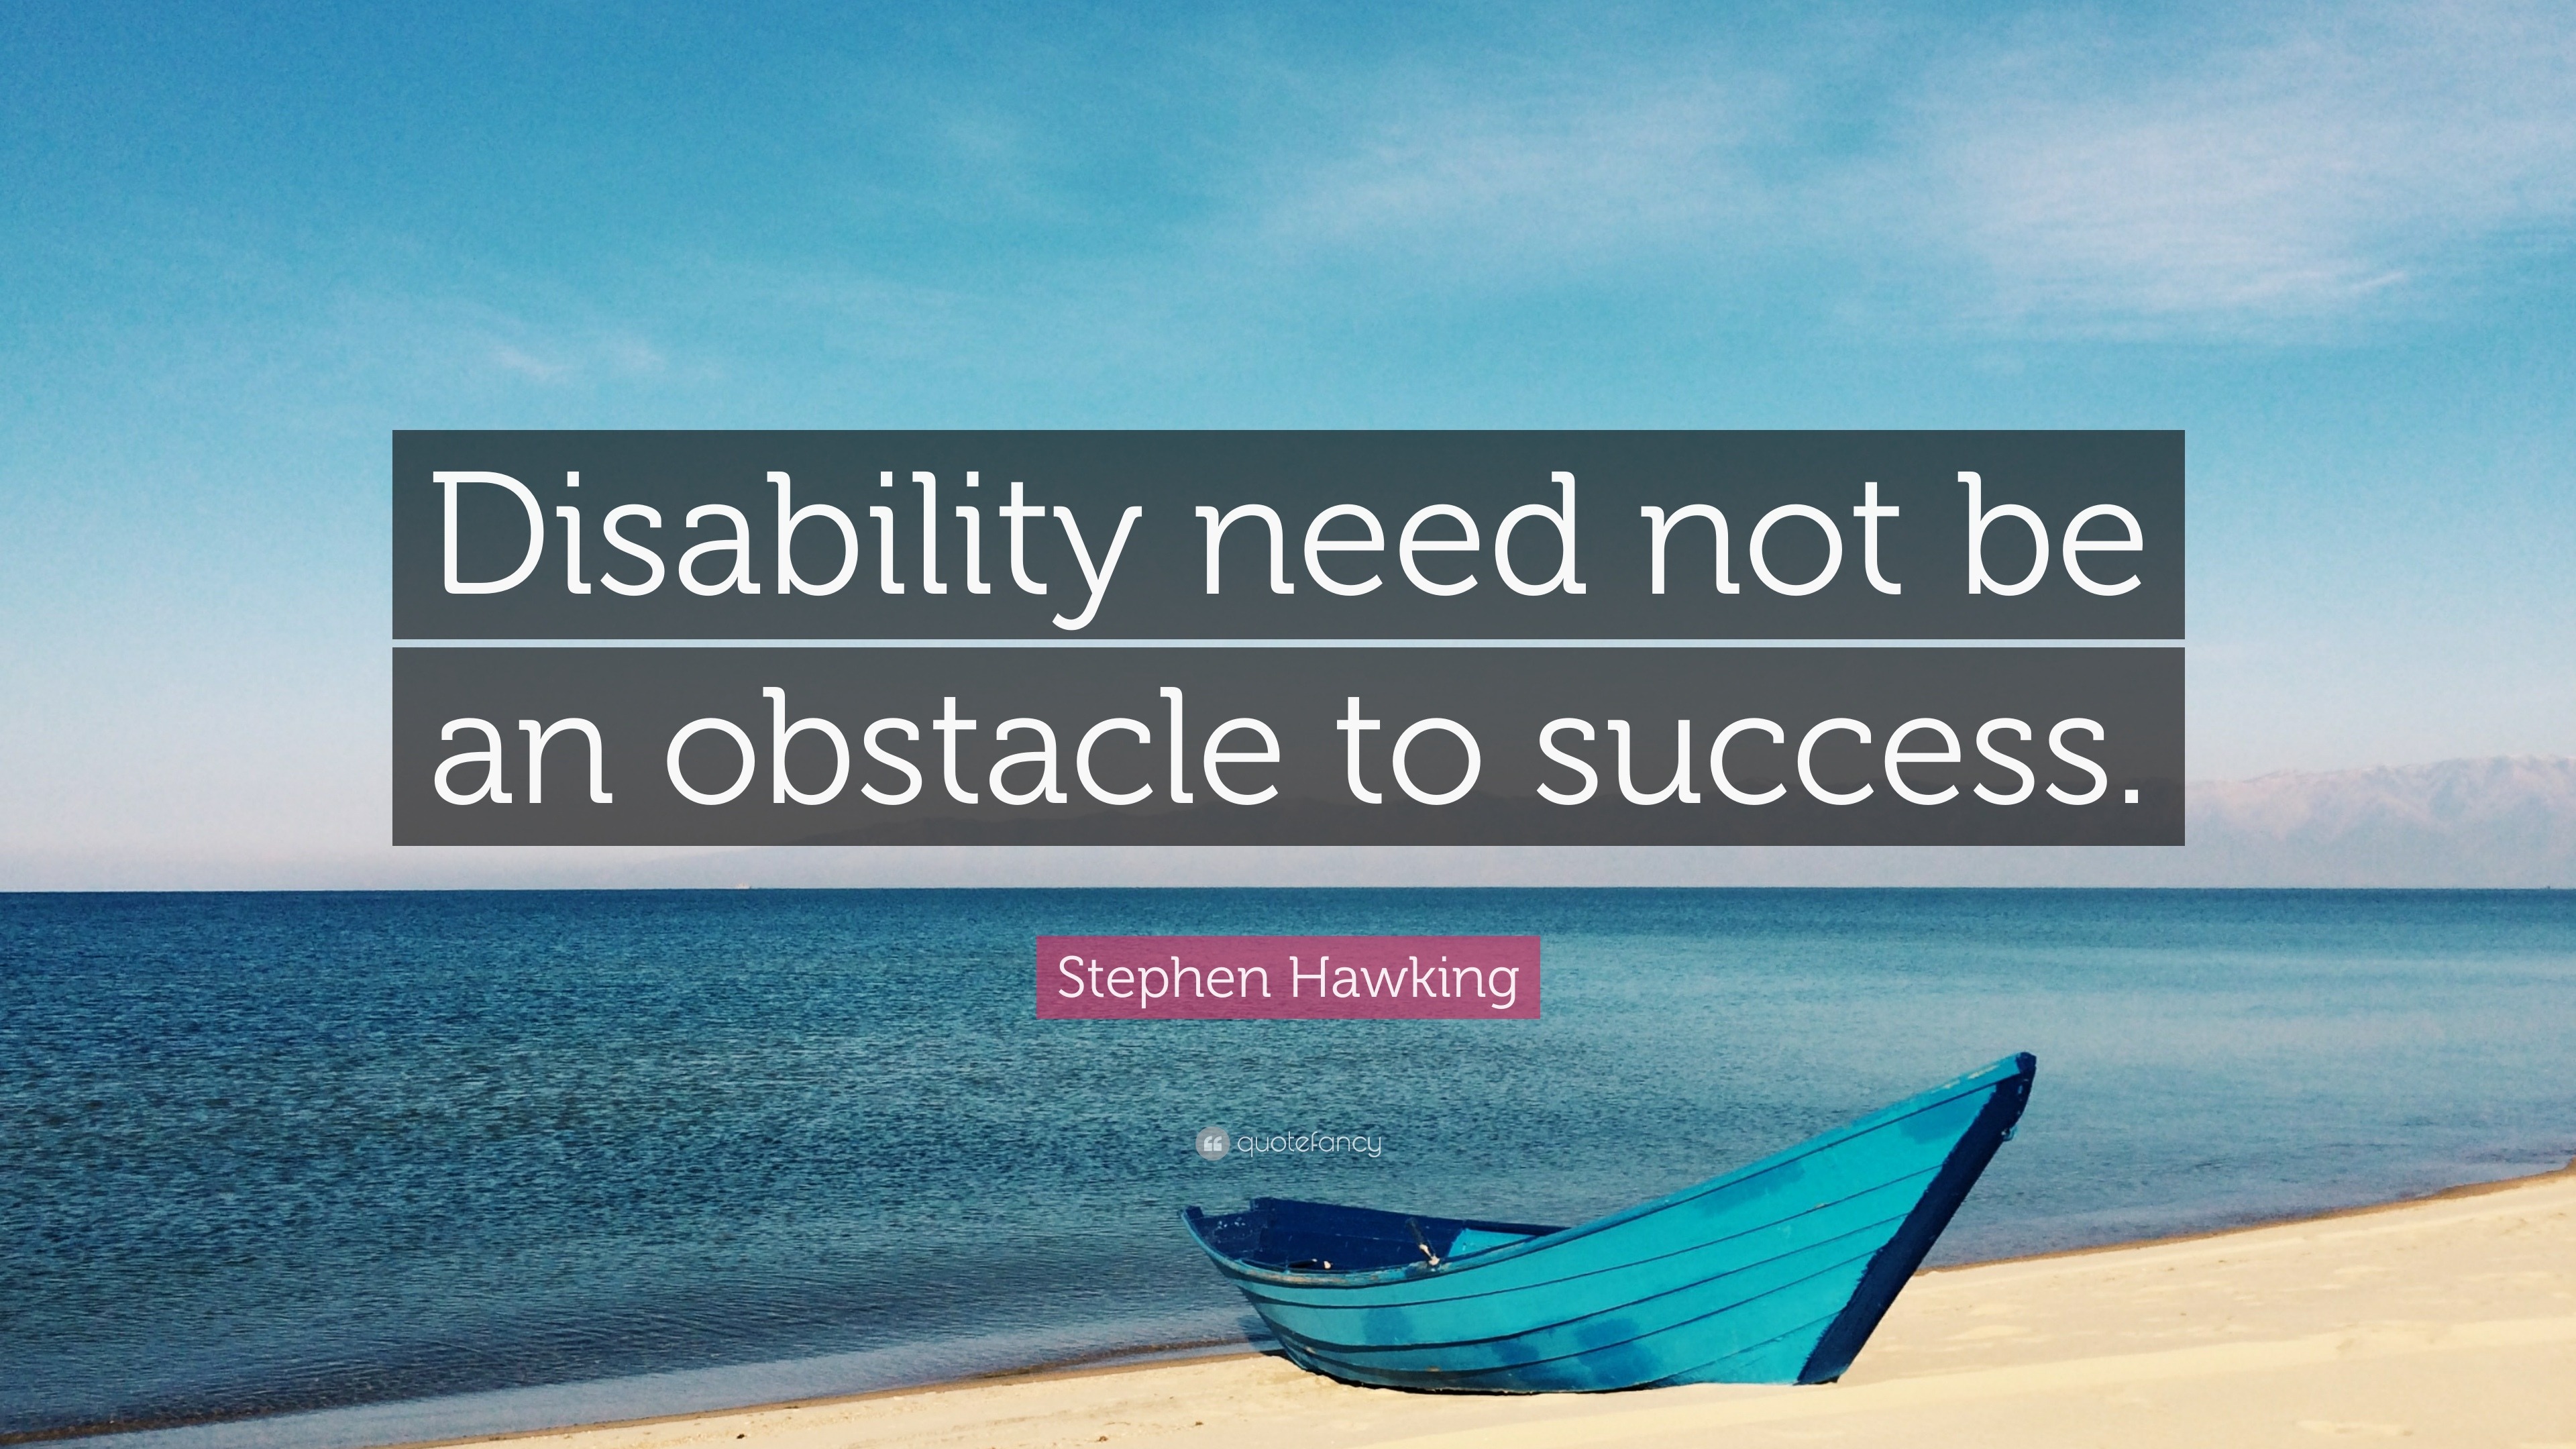 essay about disability is not an obstacle for success